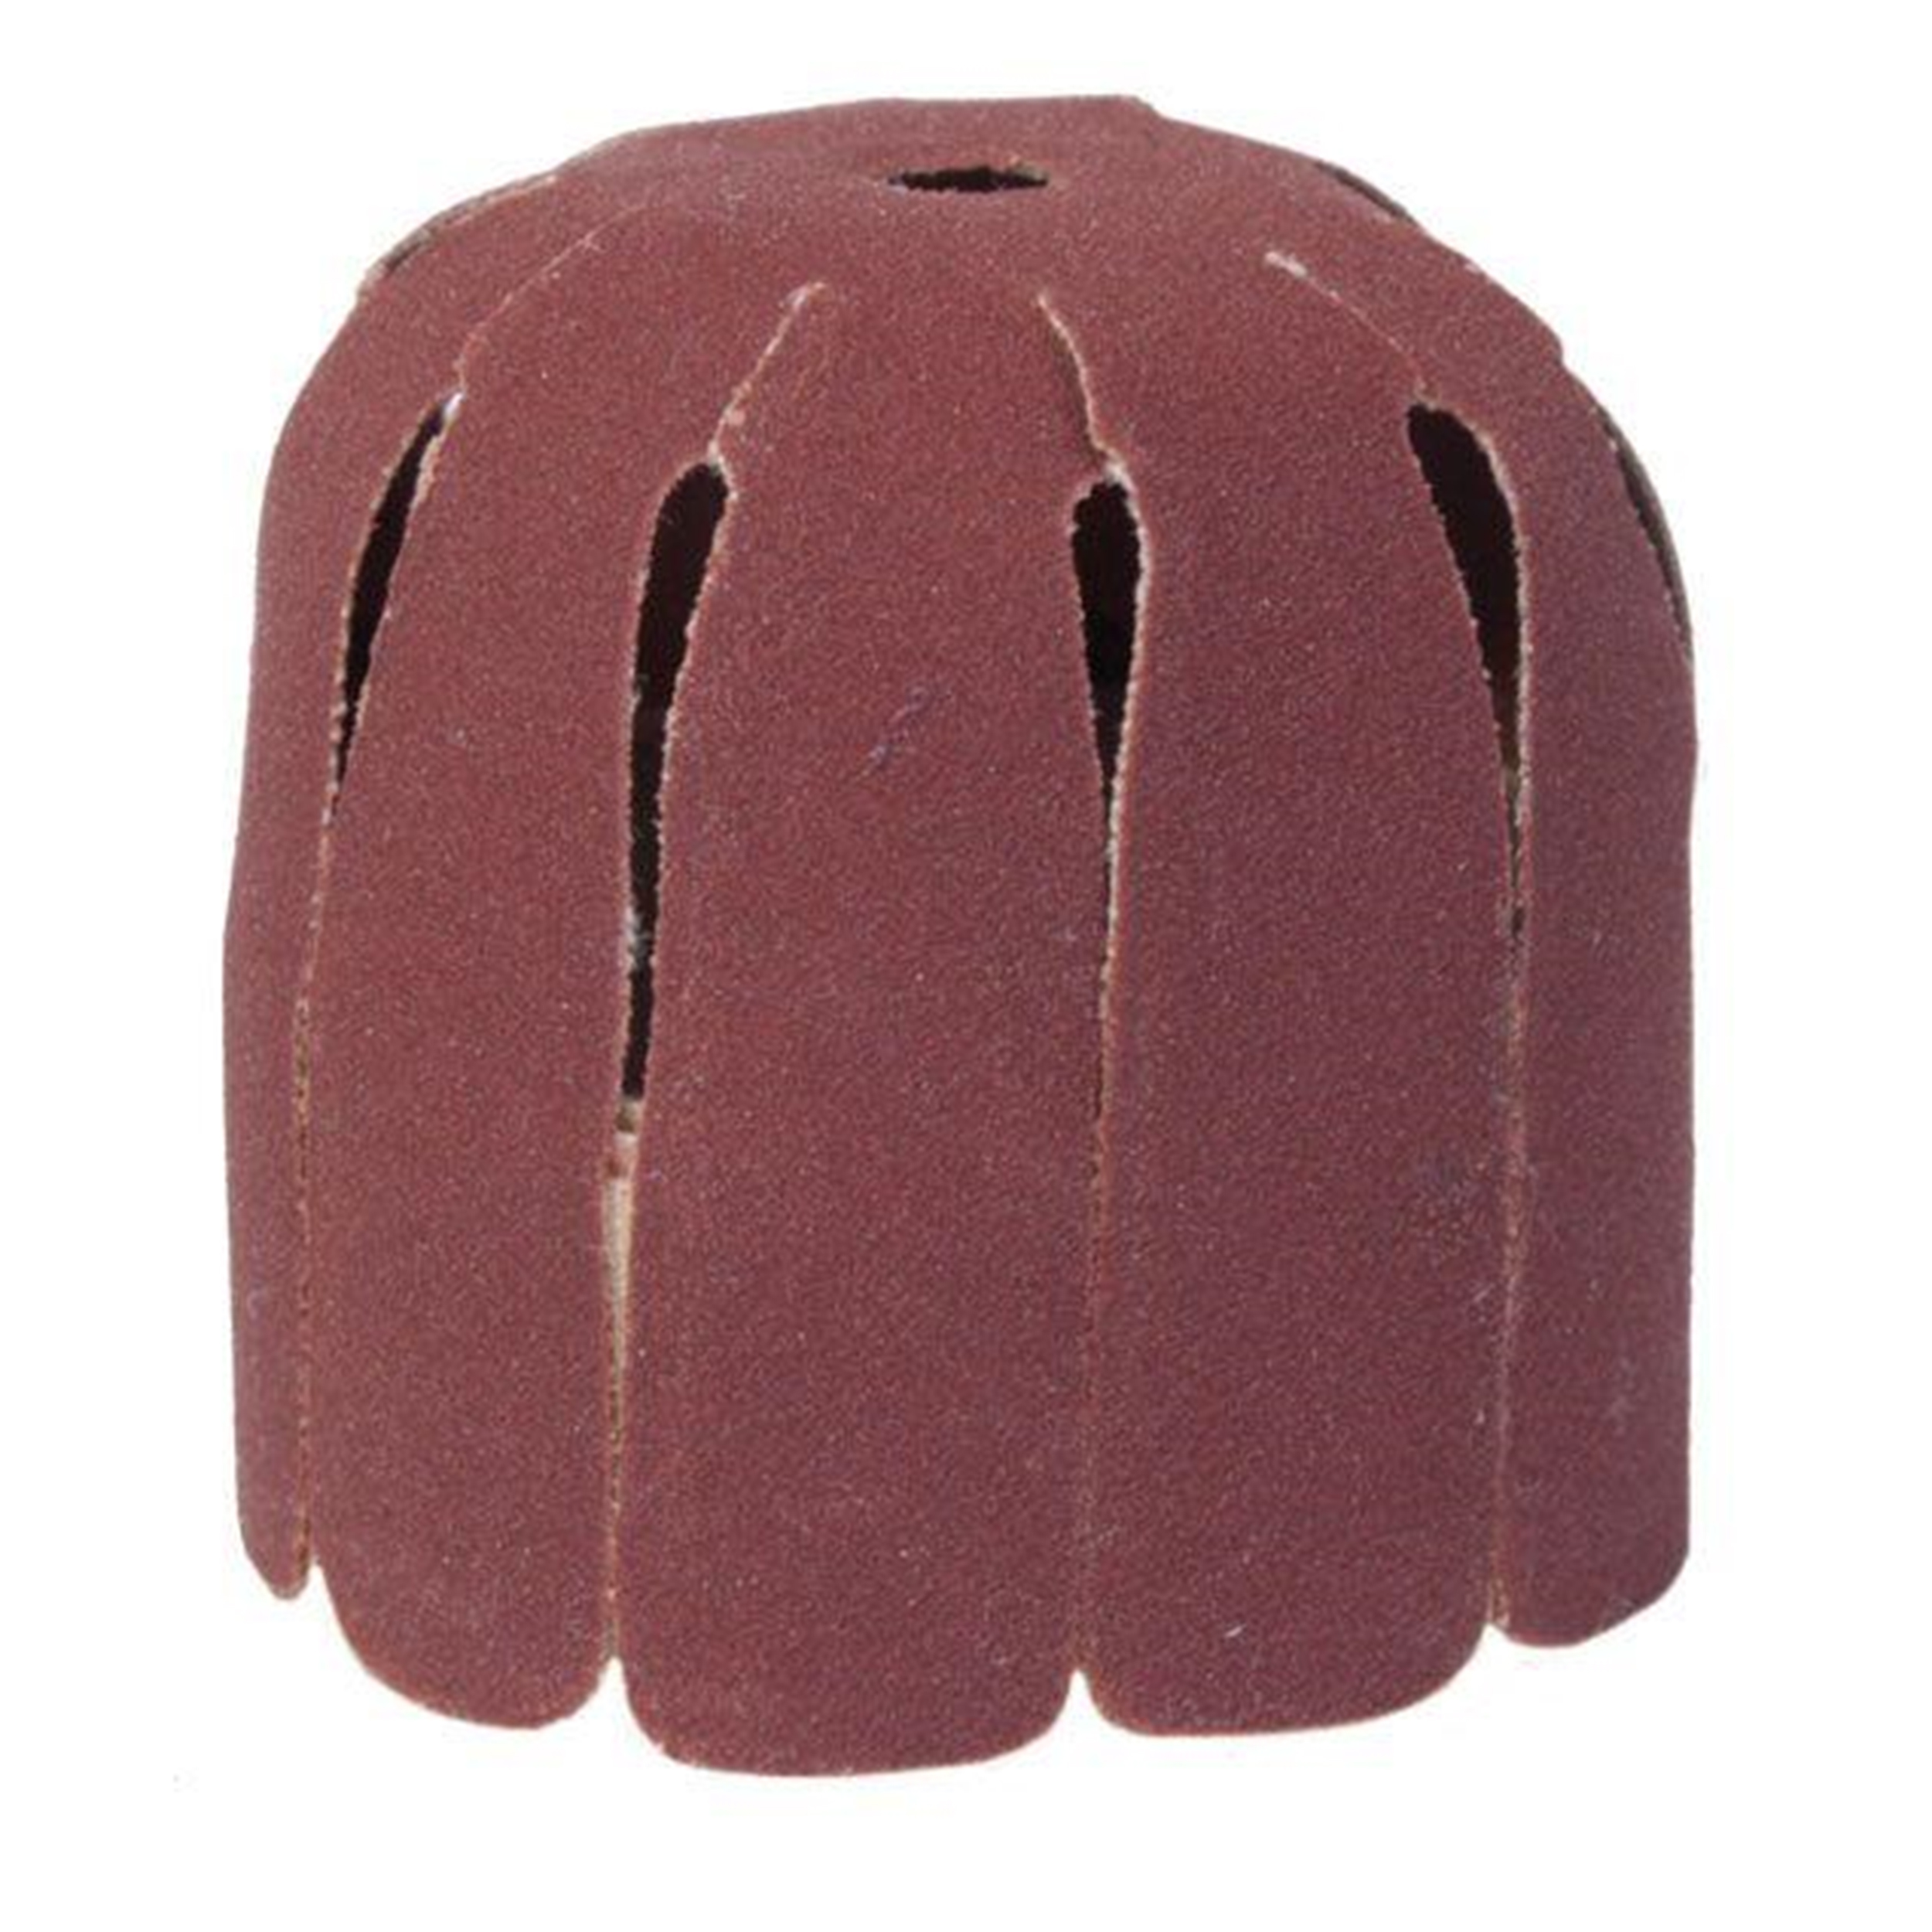 King Arthur Round Sleeves 60 Grit, 3 Pack